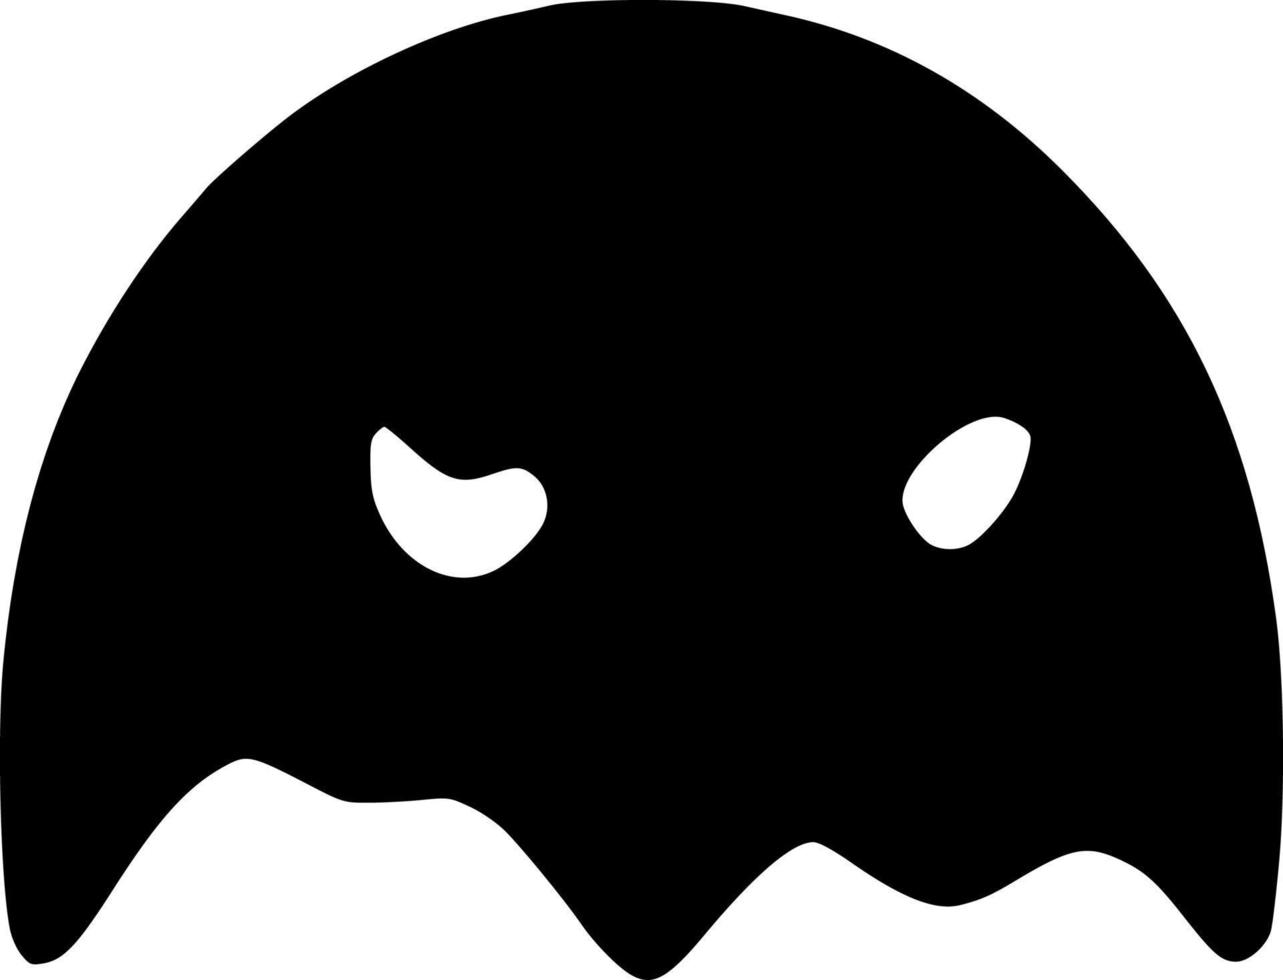 ghost. web icon simple illustration vector